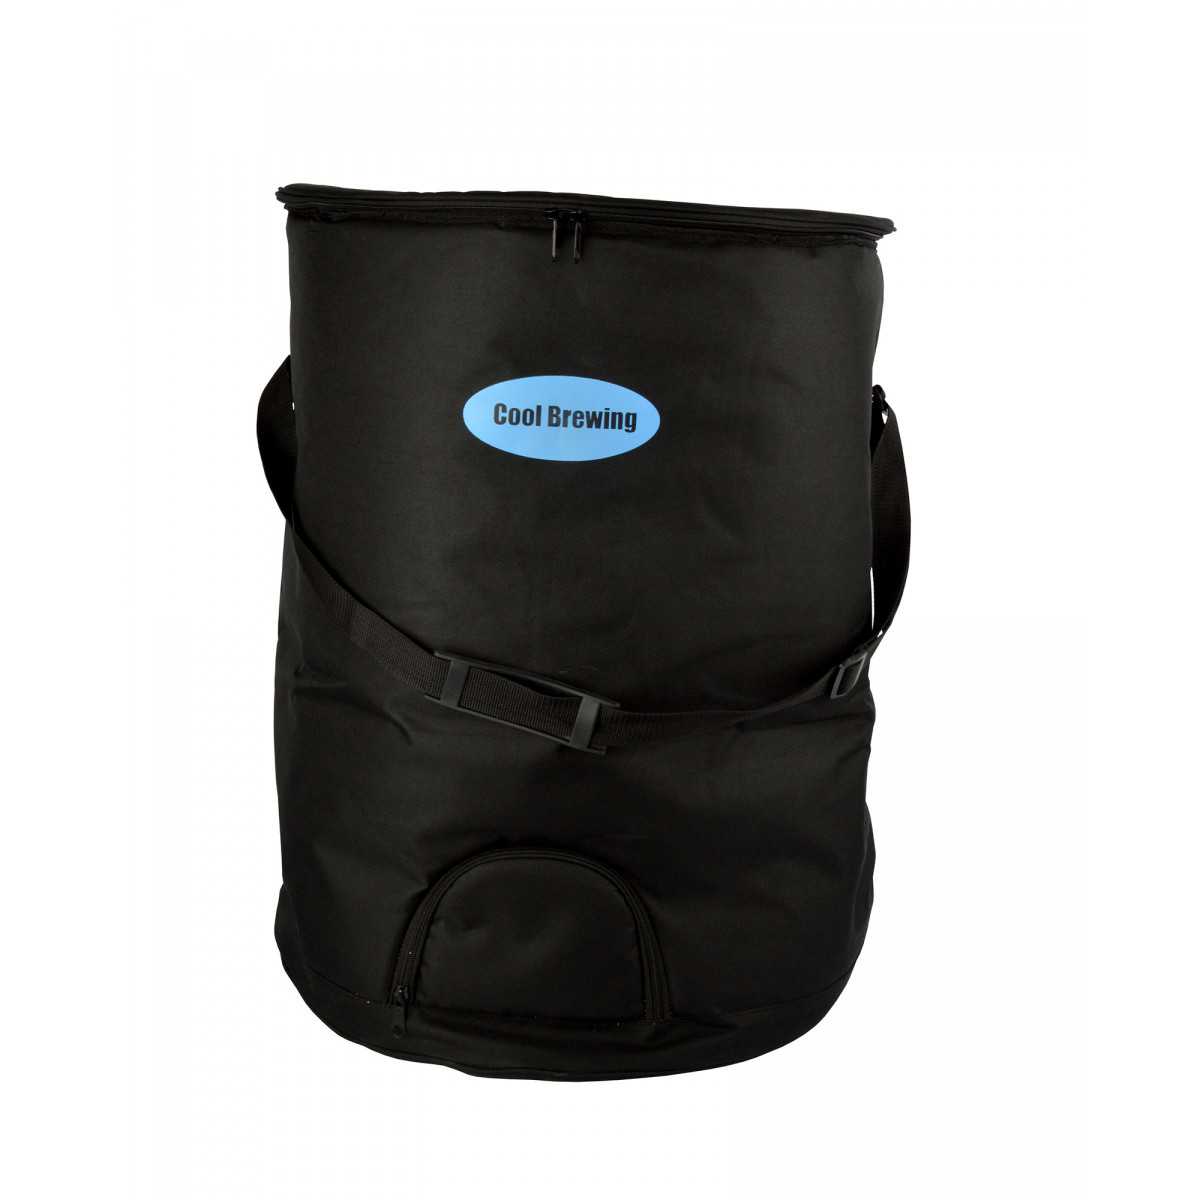 Cool Brewing Bag - Sac d'isolation